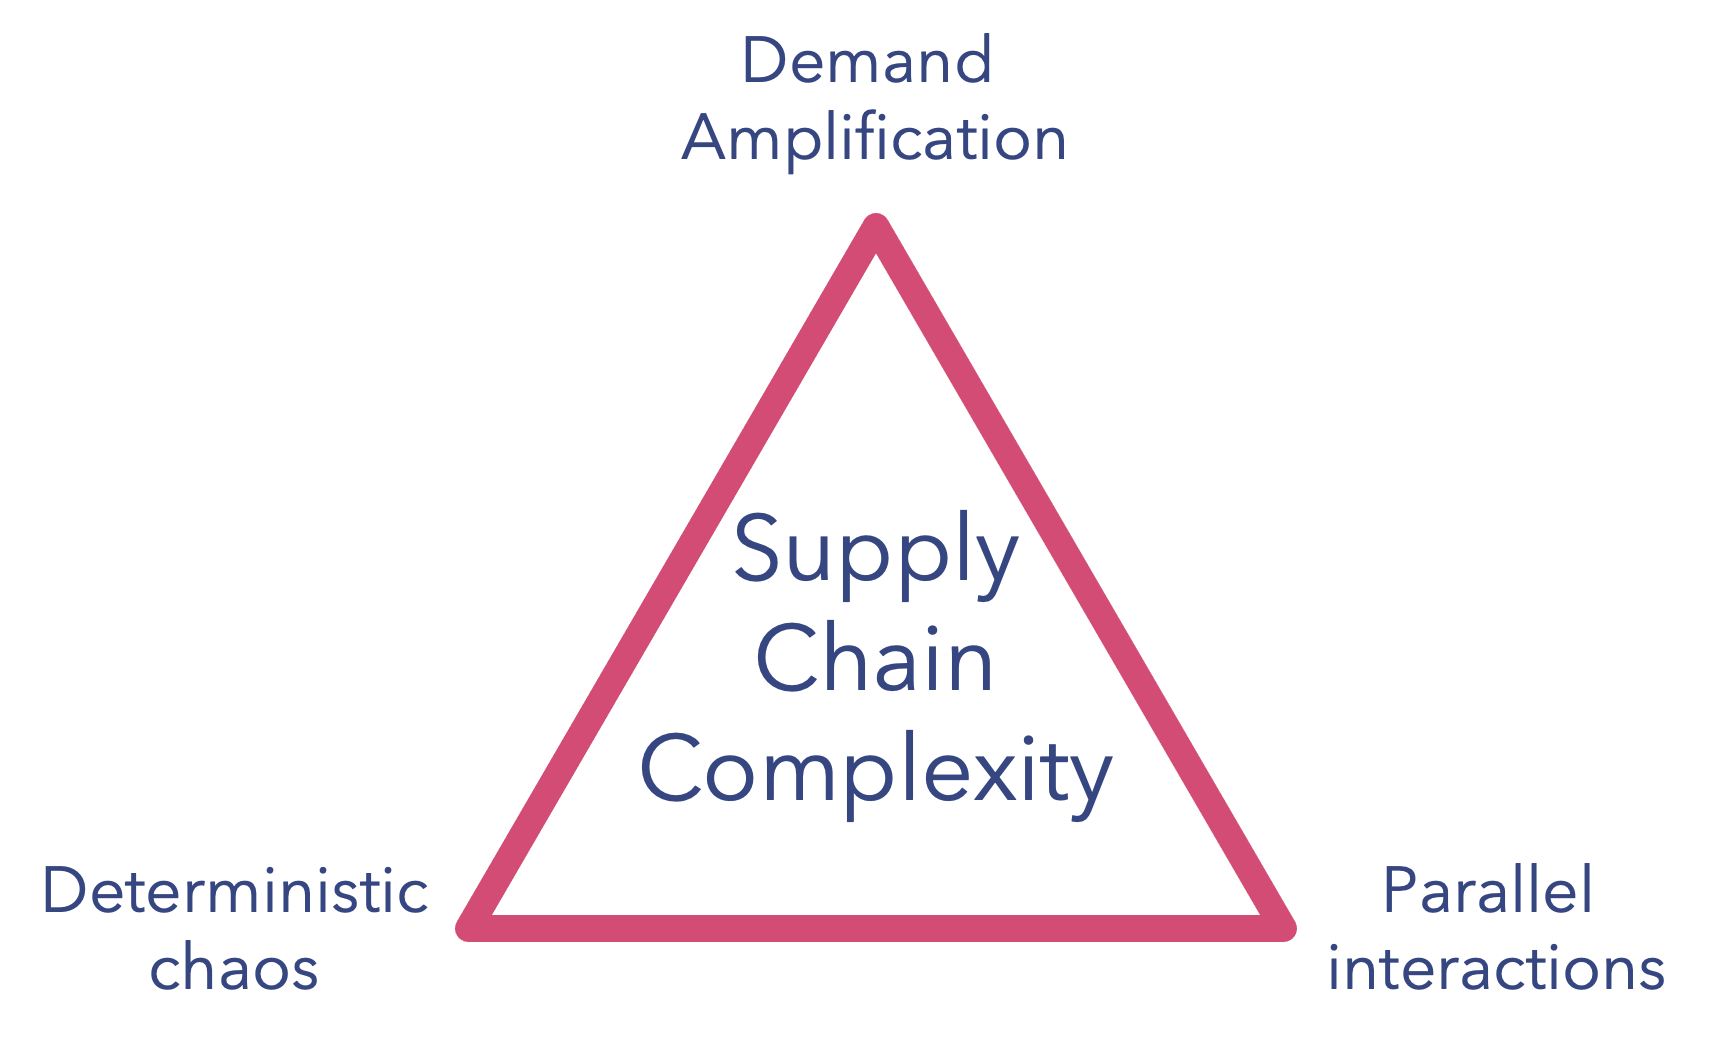 The image above shows the Supply Chain Complexity Triangle